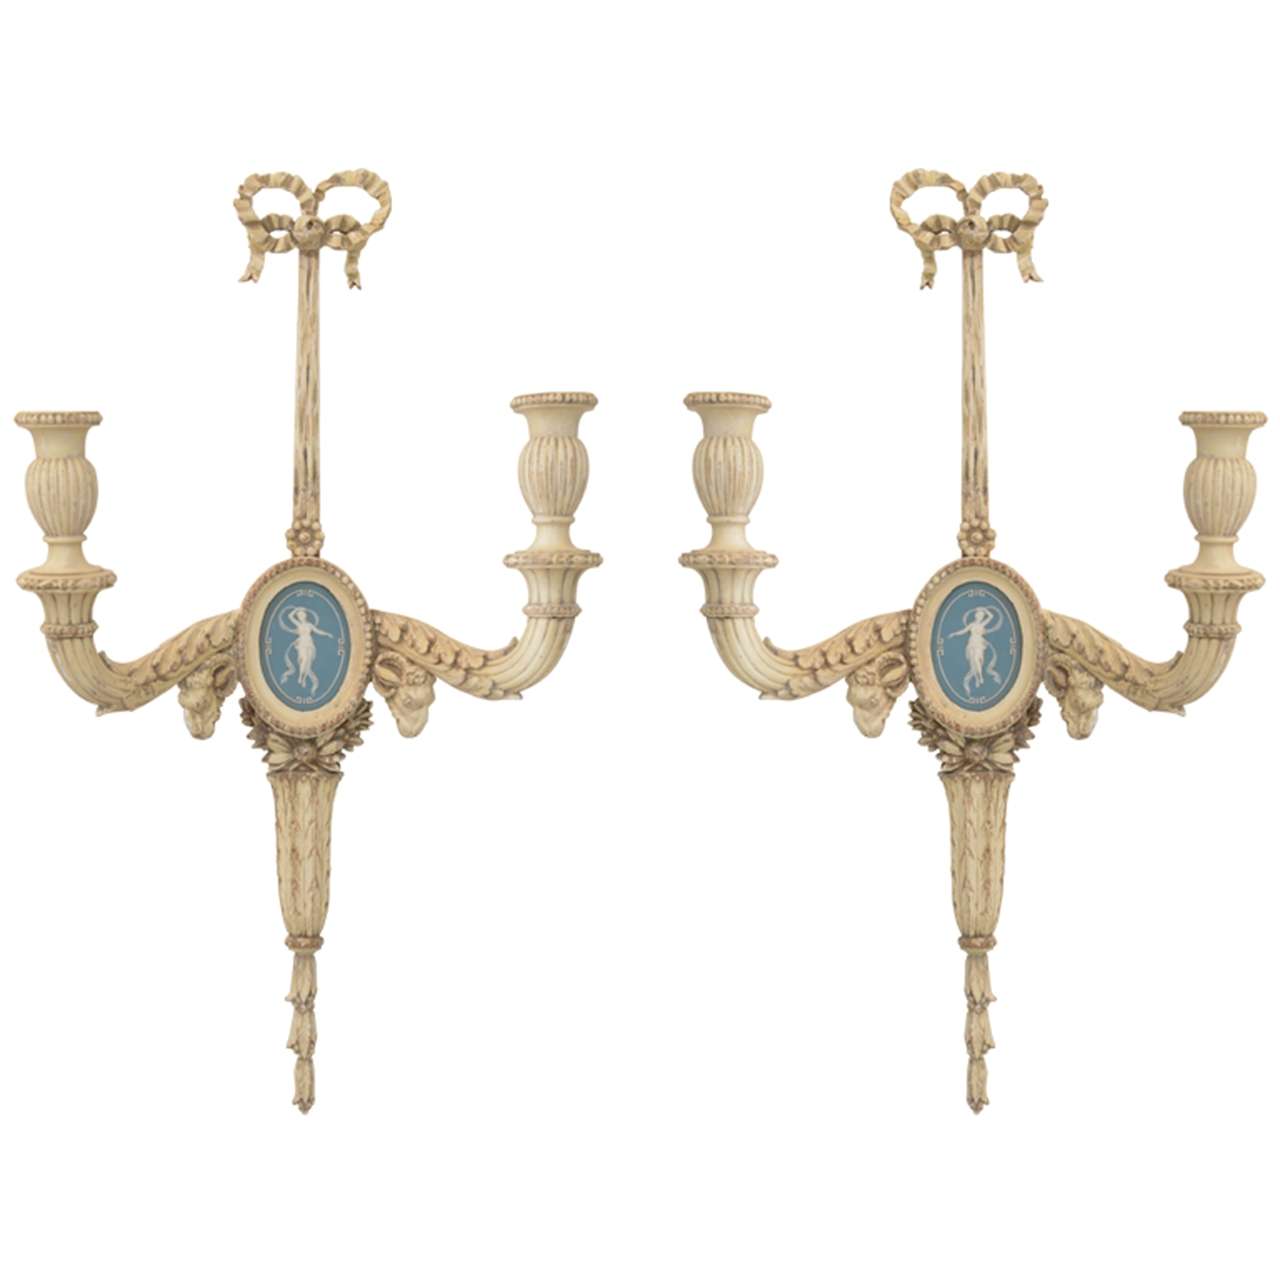 Pair of 19c. Carved Wood Sconces Centered by Wedgewood Bisque Plaques. For Sale